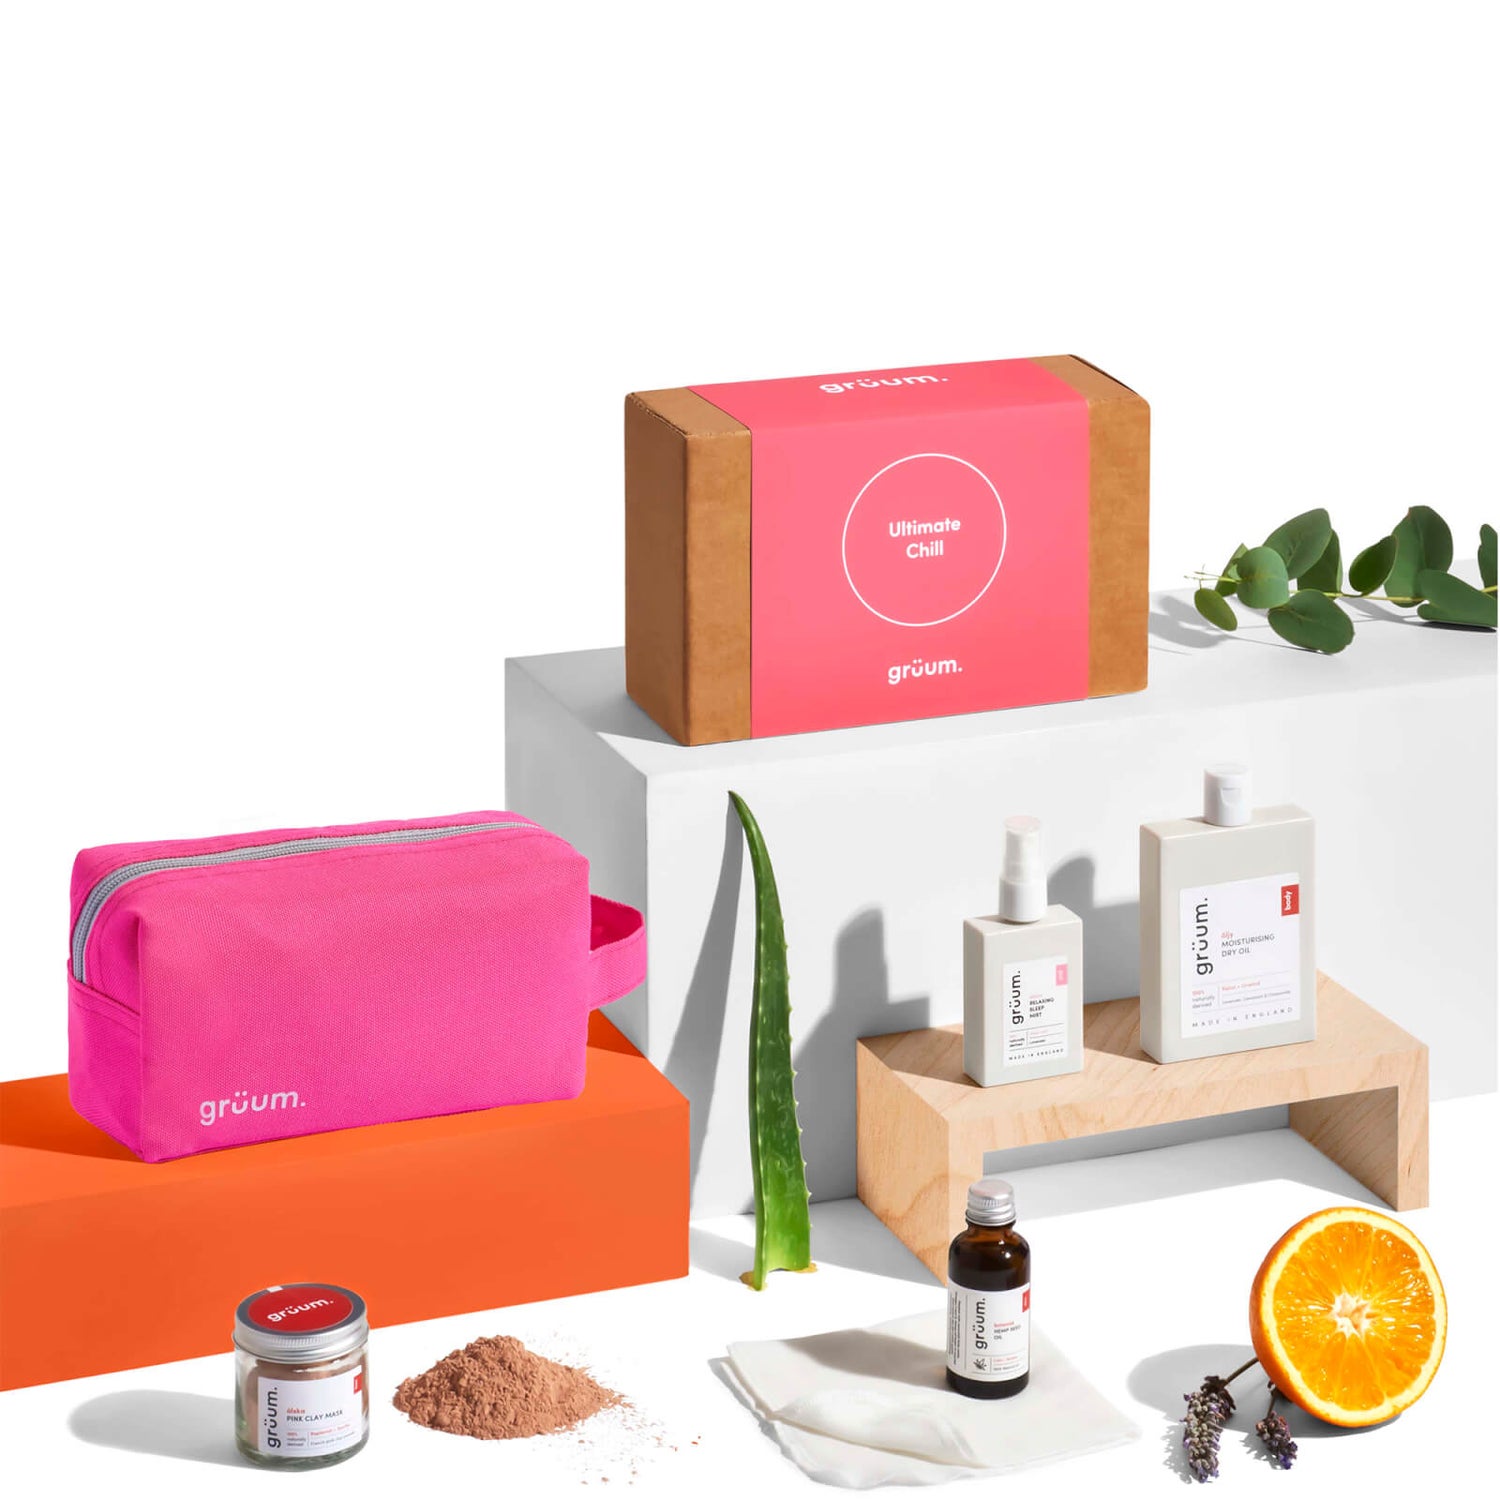 grüum Hygge Home Spa Ultimate Chill Gift Set (Worth £72.00)